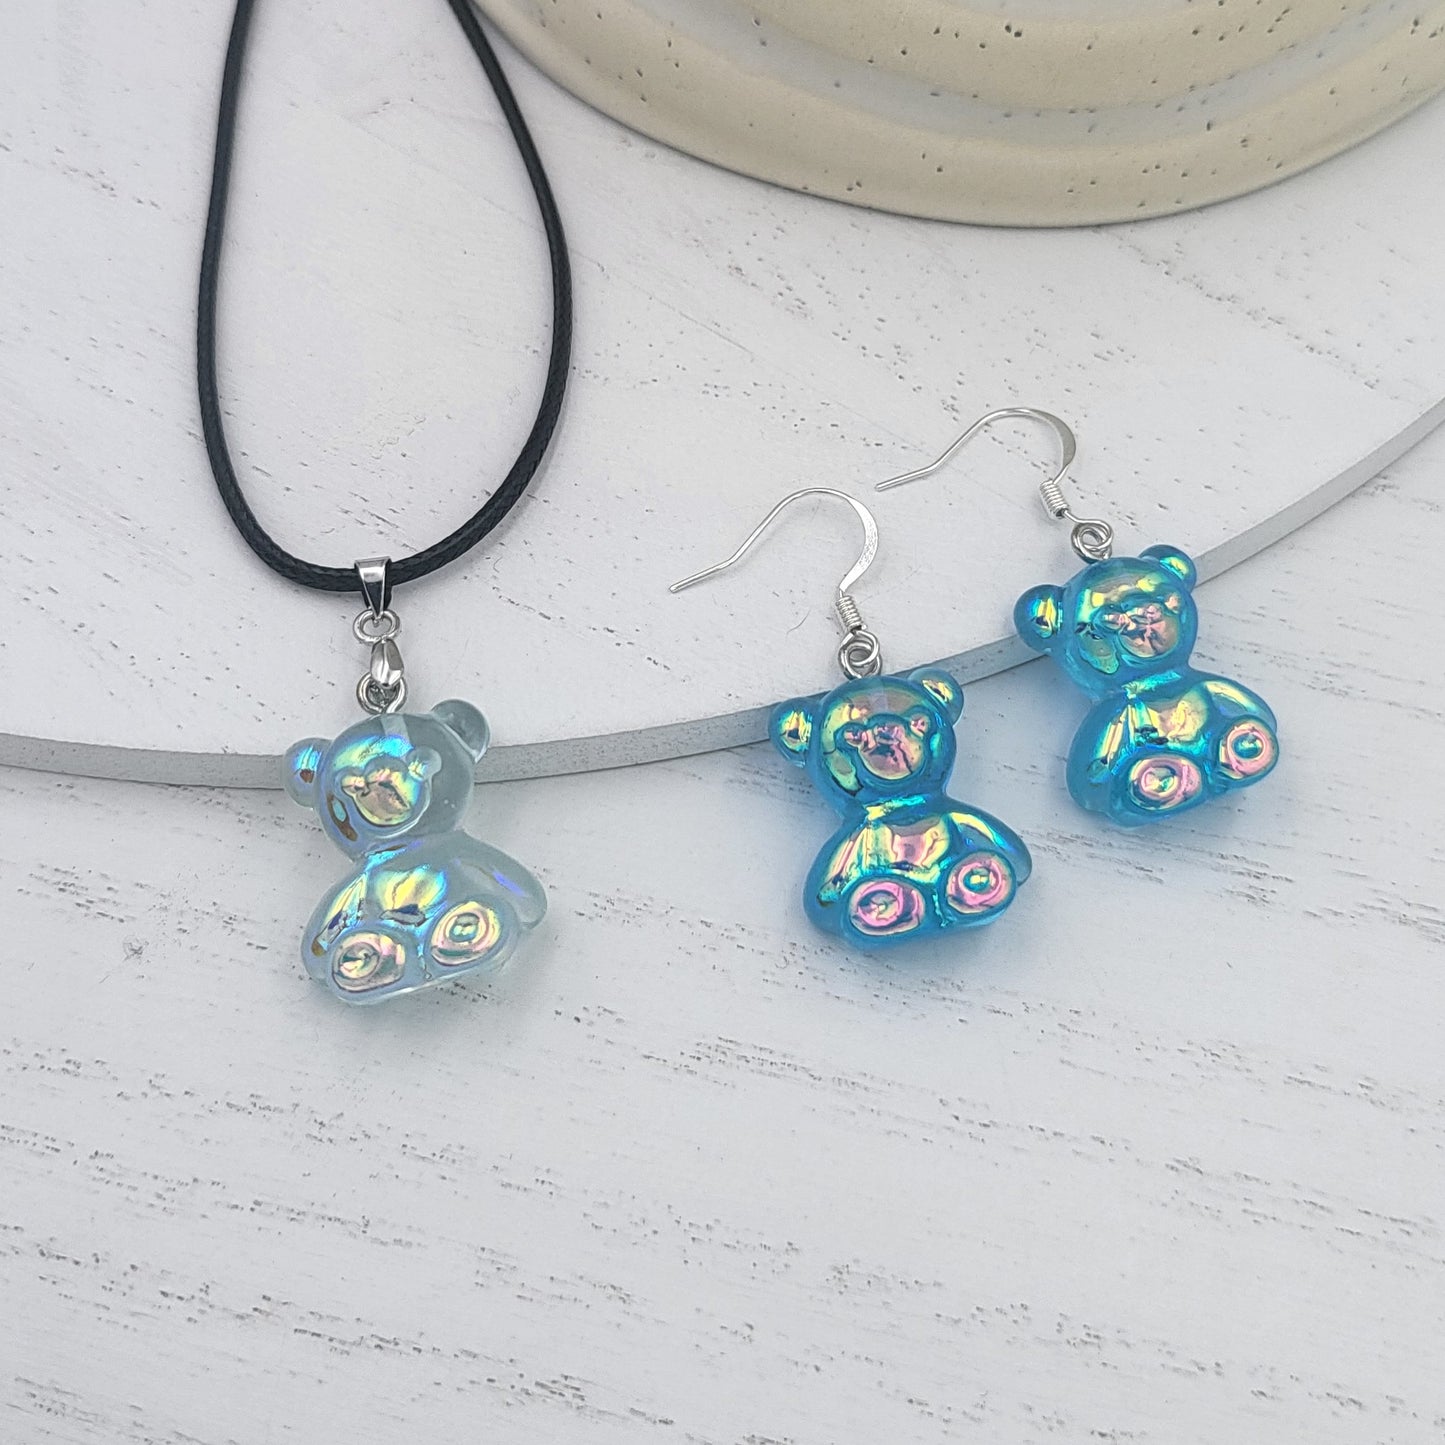 BESHEEK Silvertone and Blue Resin Gummy Bear Jewelry Set | Hypoallergenic Boho Kitchsy Artistic Funky Cute Style Fashion Necklace and Earrings